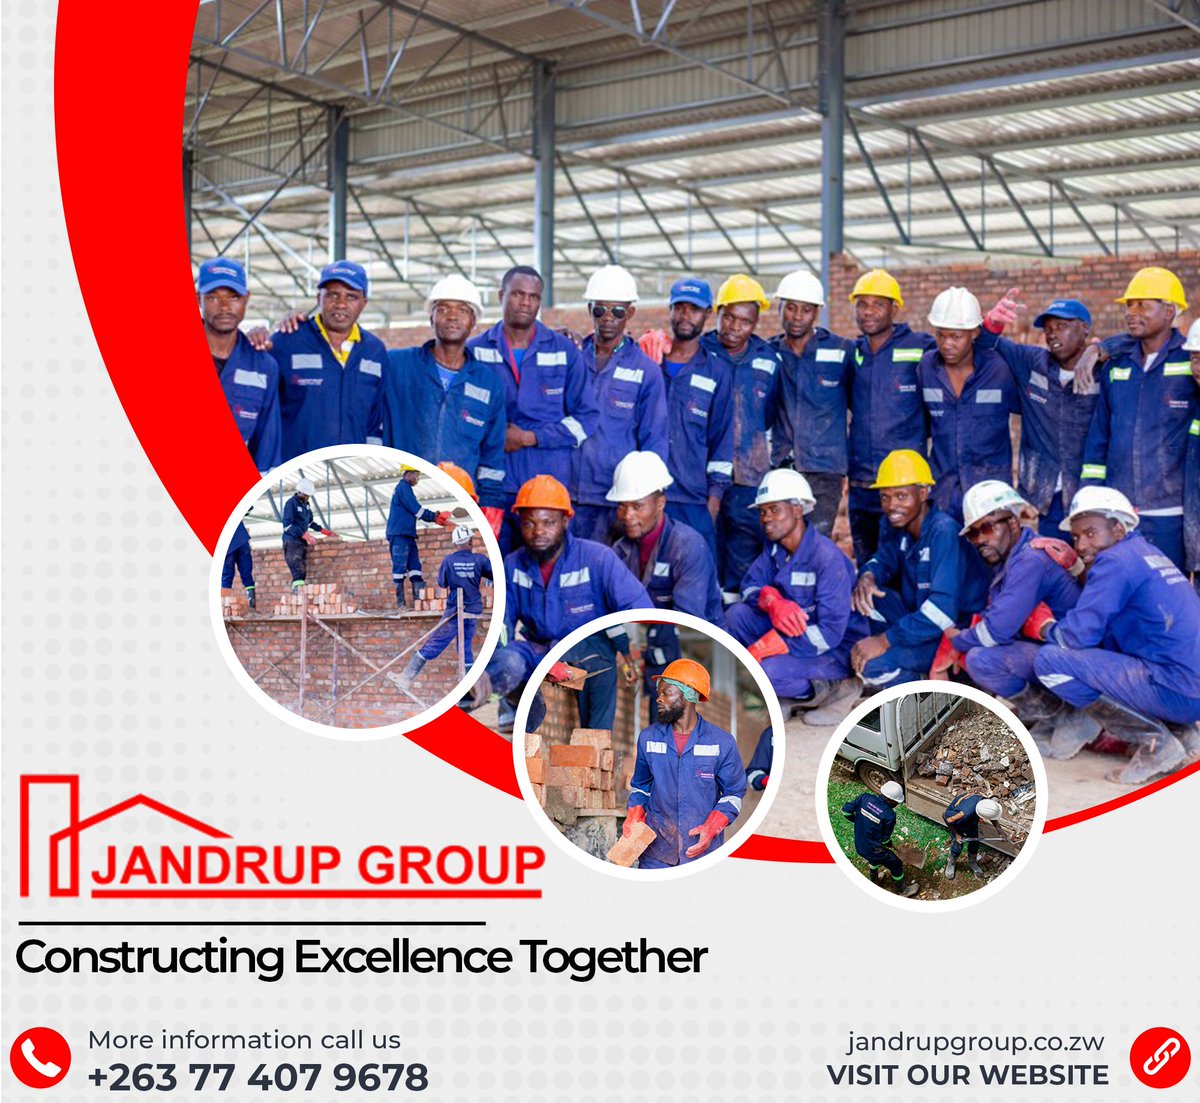 Join us on our journey of constructing excellence together with the Jandrup Group. Building a better future. #JandrupGroup #ConstructionExcellence #BuildingTogether #ConstructionProjects